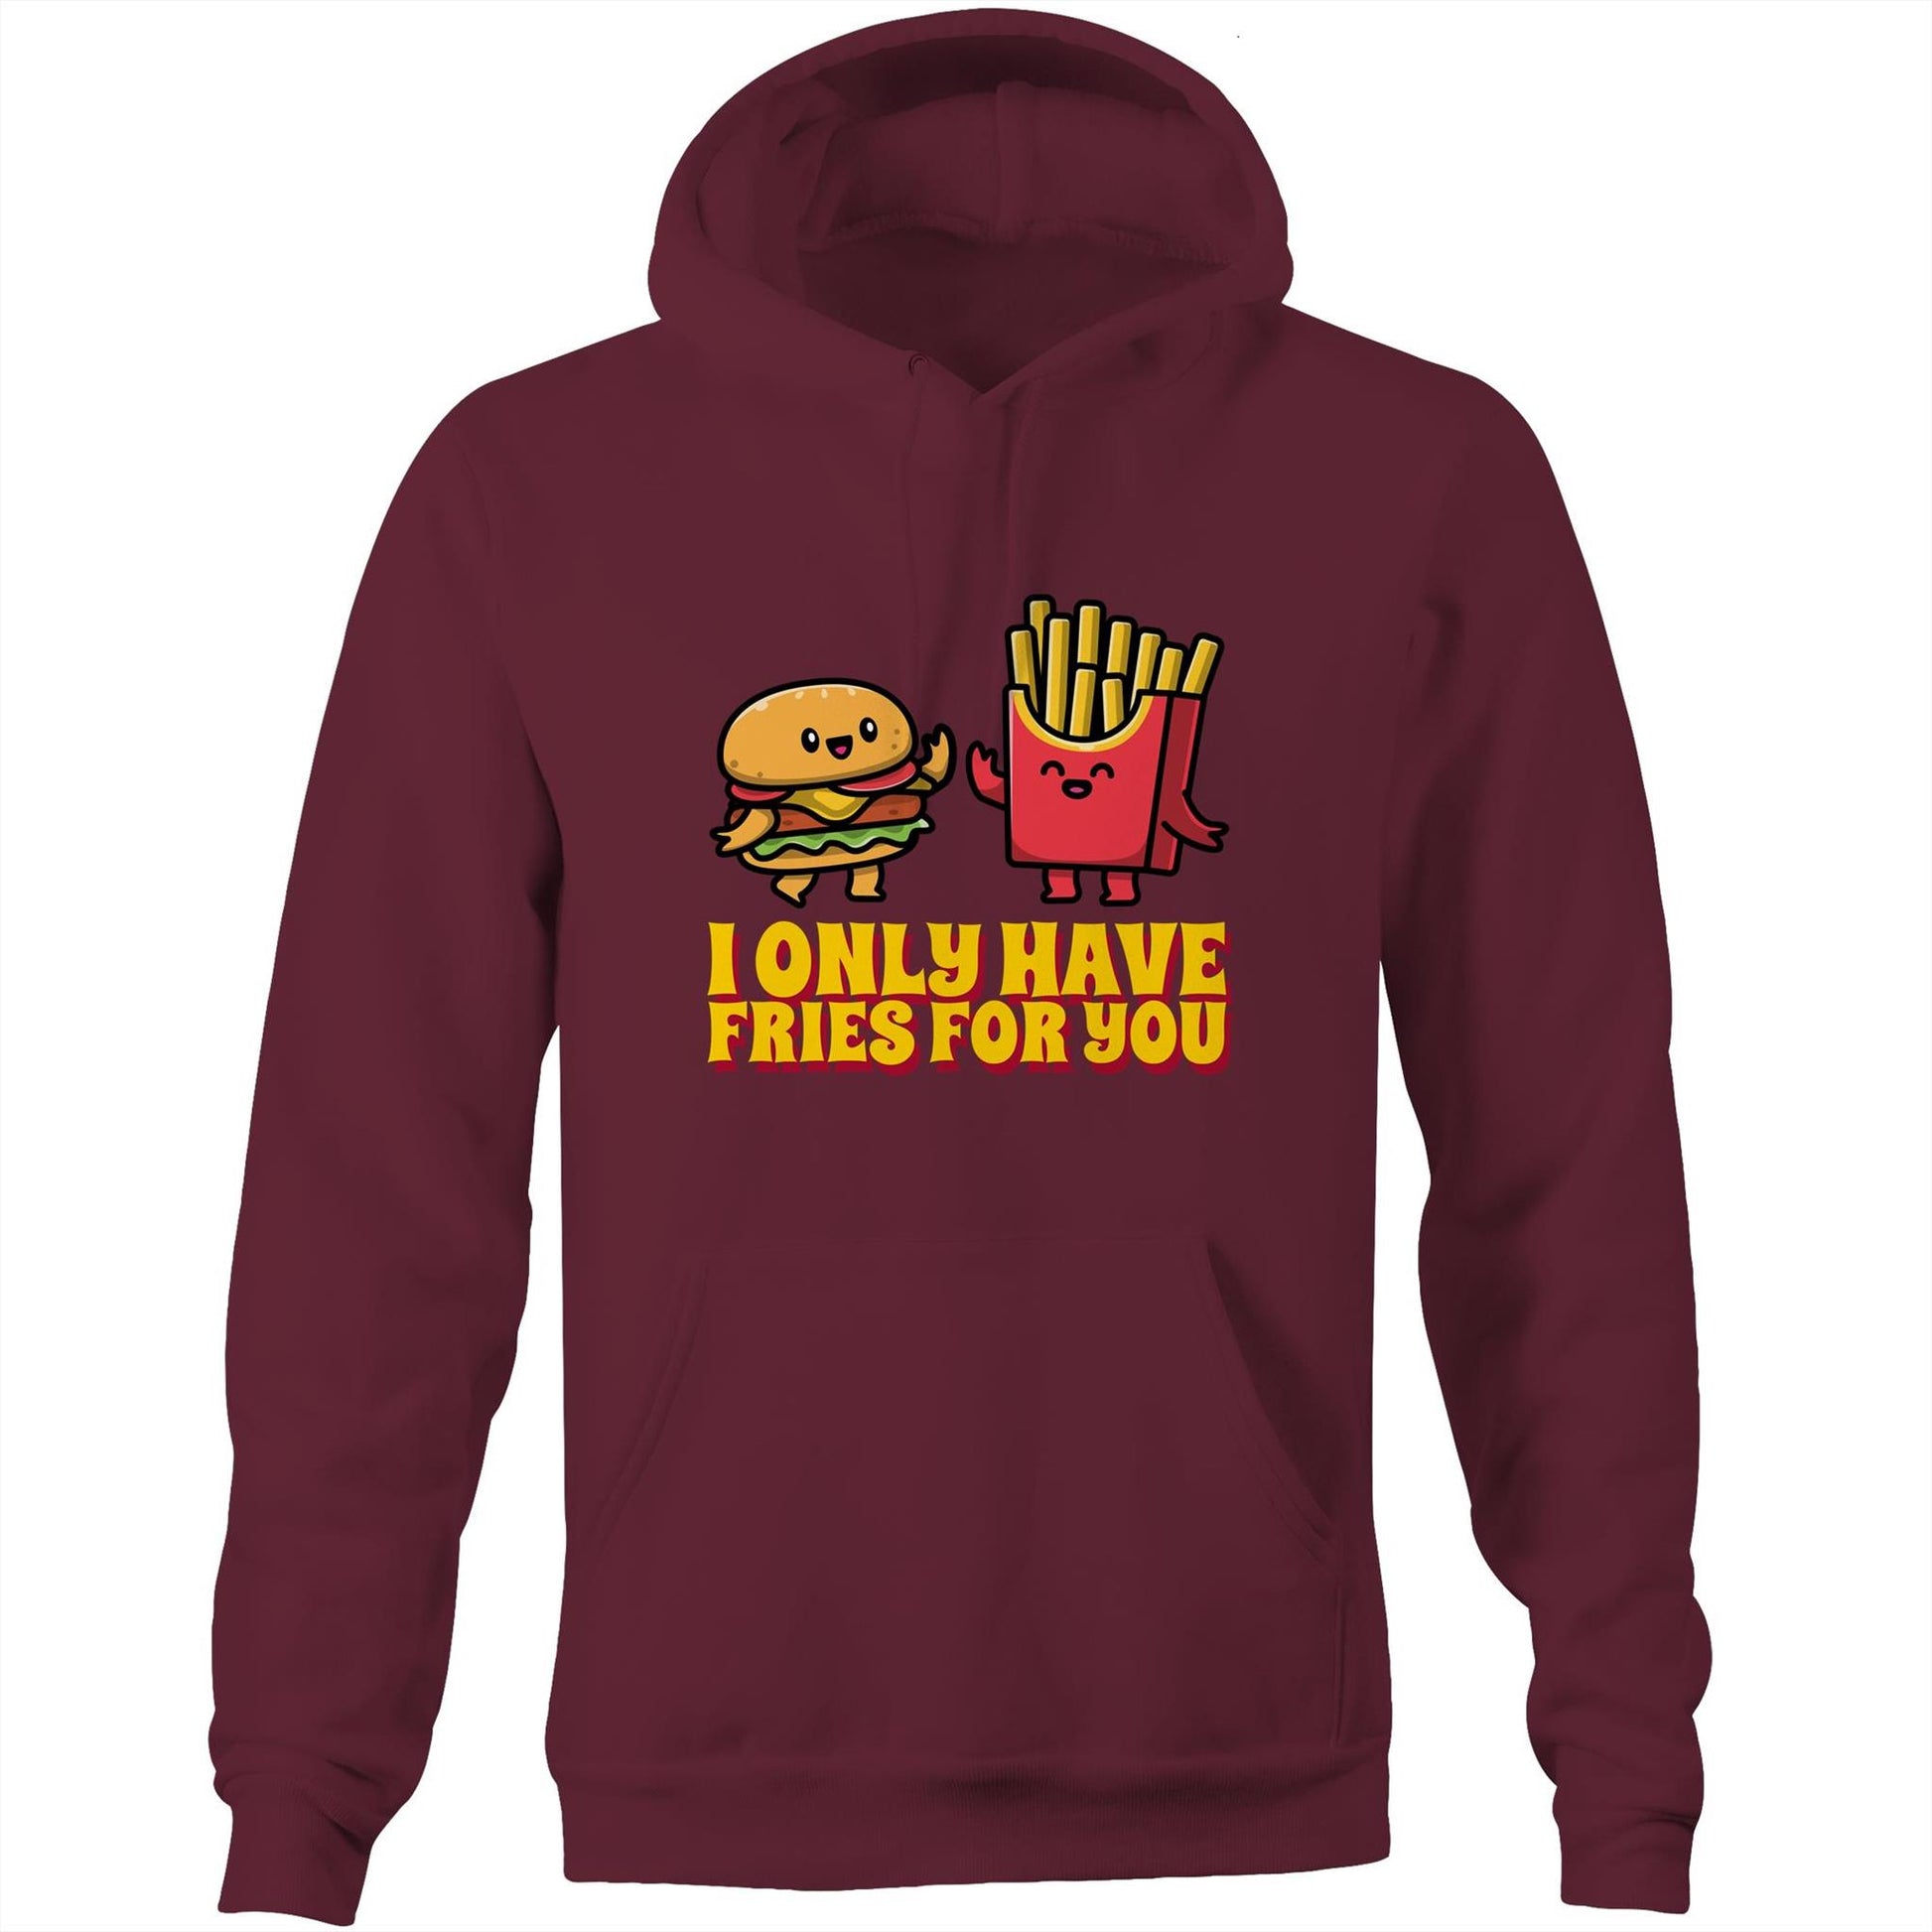 I Only Have Fries For You, Burger And Fries - Pocket Hoodie Sweatshirt Burgundy Hoodie